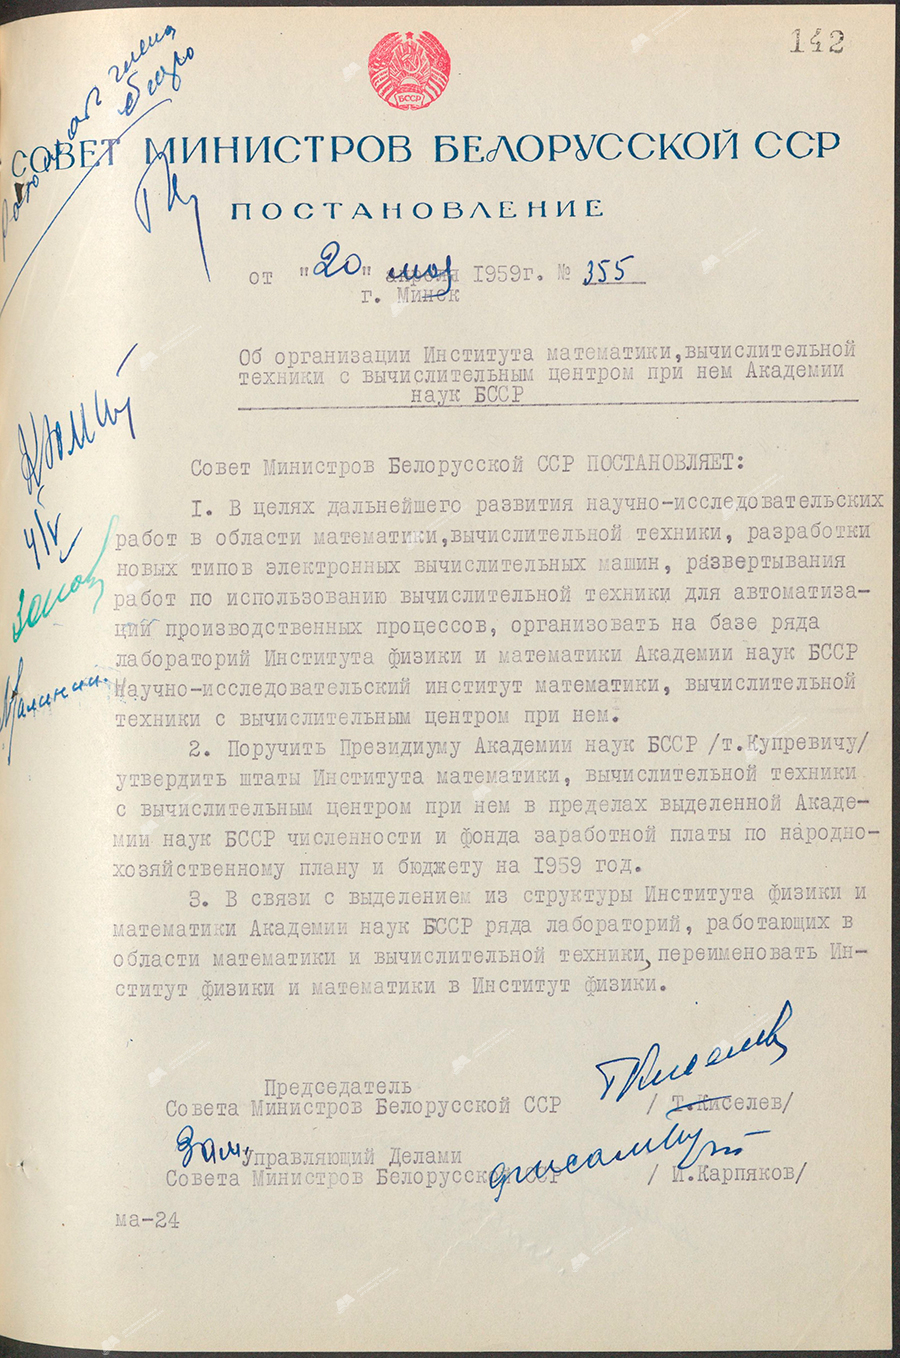 Resolution No. 355 of the Council of Ministers of the BSSR «On the organization of the Institute of Mathematics and Computer Science with a computer center attached to it of the Academy of Sciences of the BSSR»-с. 0